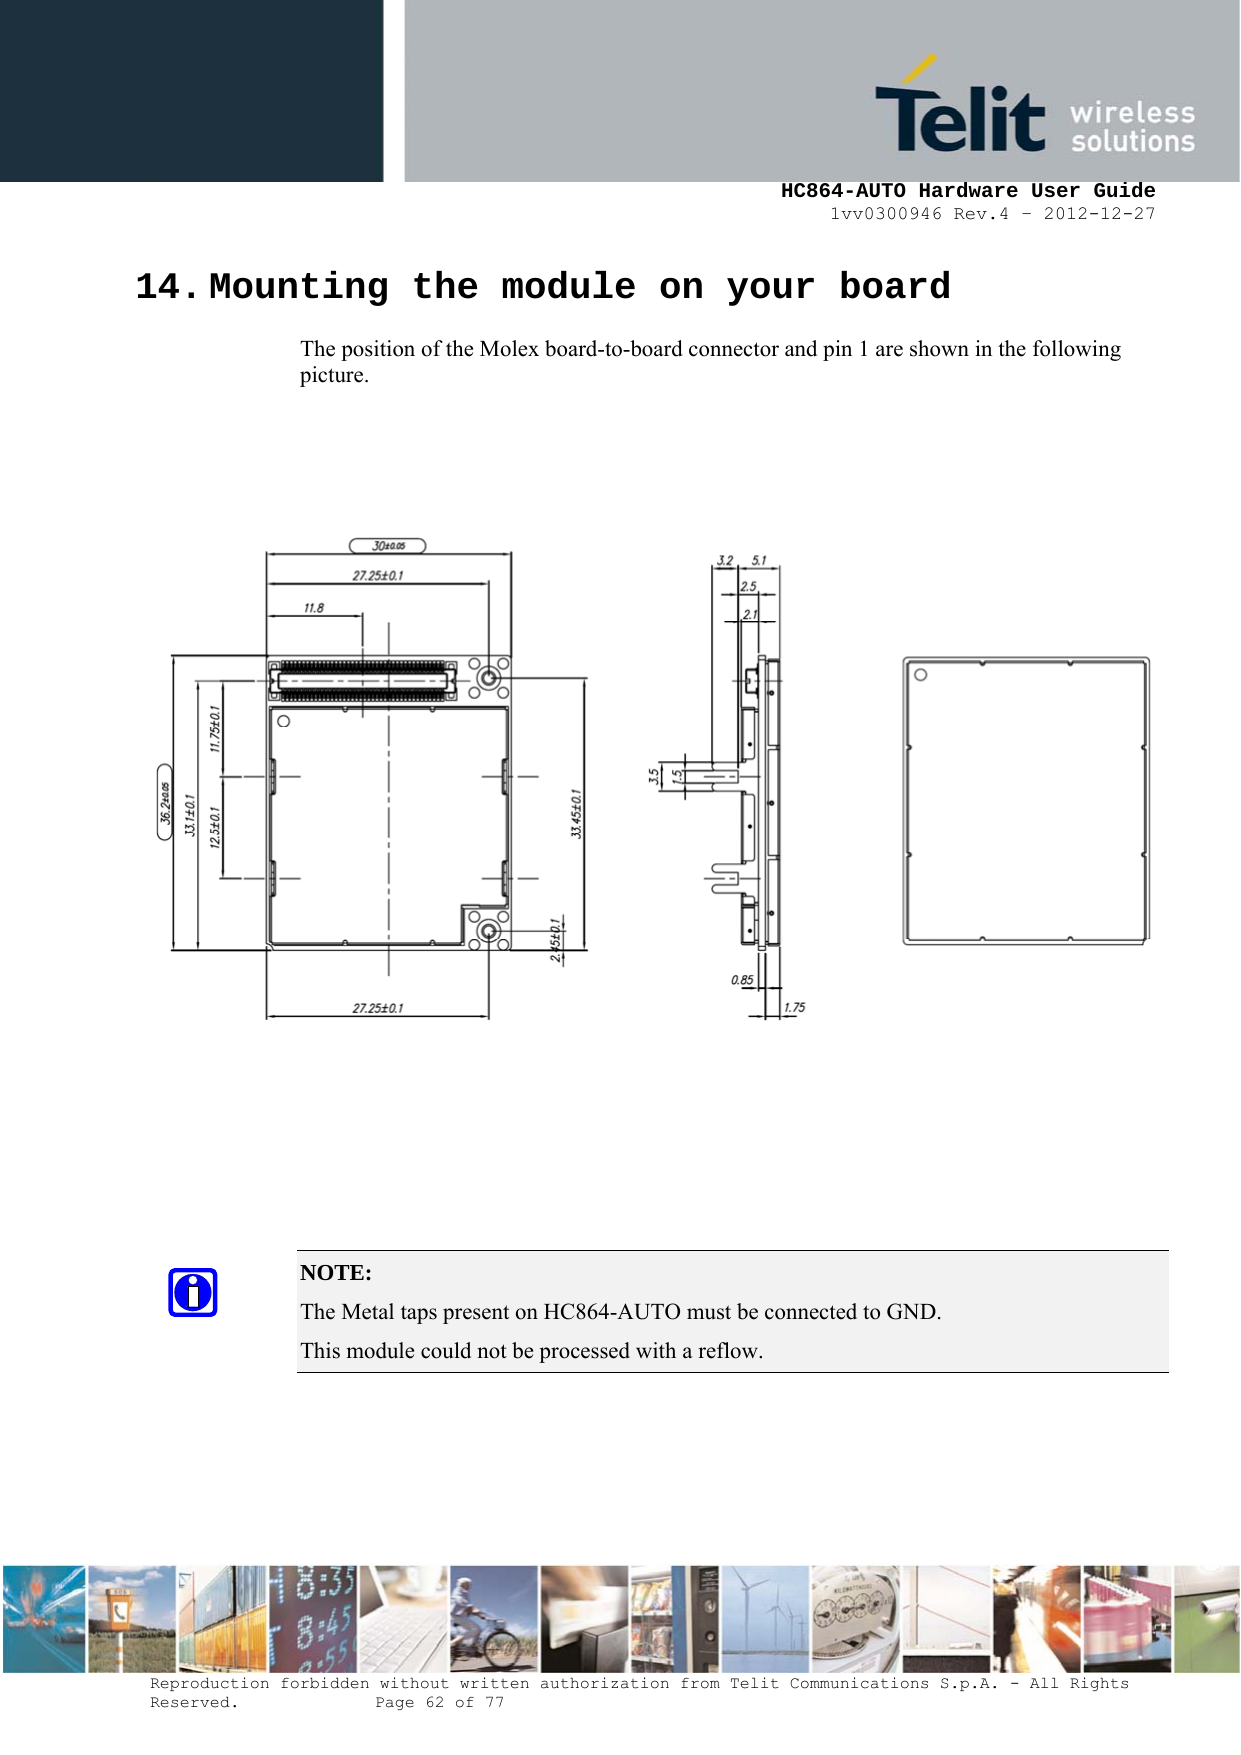     HC864-AUTO Hardware User Guide 1vv0300946 Rev.4 – 2012-12-27 Reproduction forbidden without written authorization from Telit Communications S.p.A. - All Rights Reserved.    Page 62 of 77  14. Mounting the module on your board The position of the Molex board-to-board connector and pin 1 are shown in the following picture.           NOTE:  The Metal taps present on HC864-AUTO must be connected to GND. This module could not be processed with a reflow. 